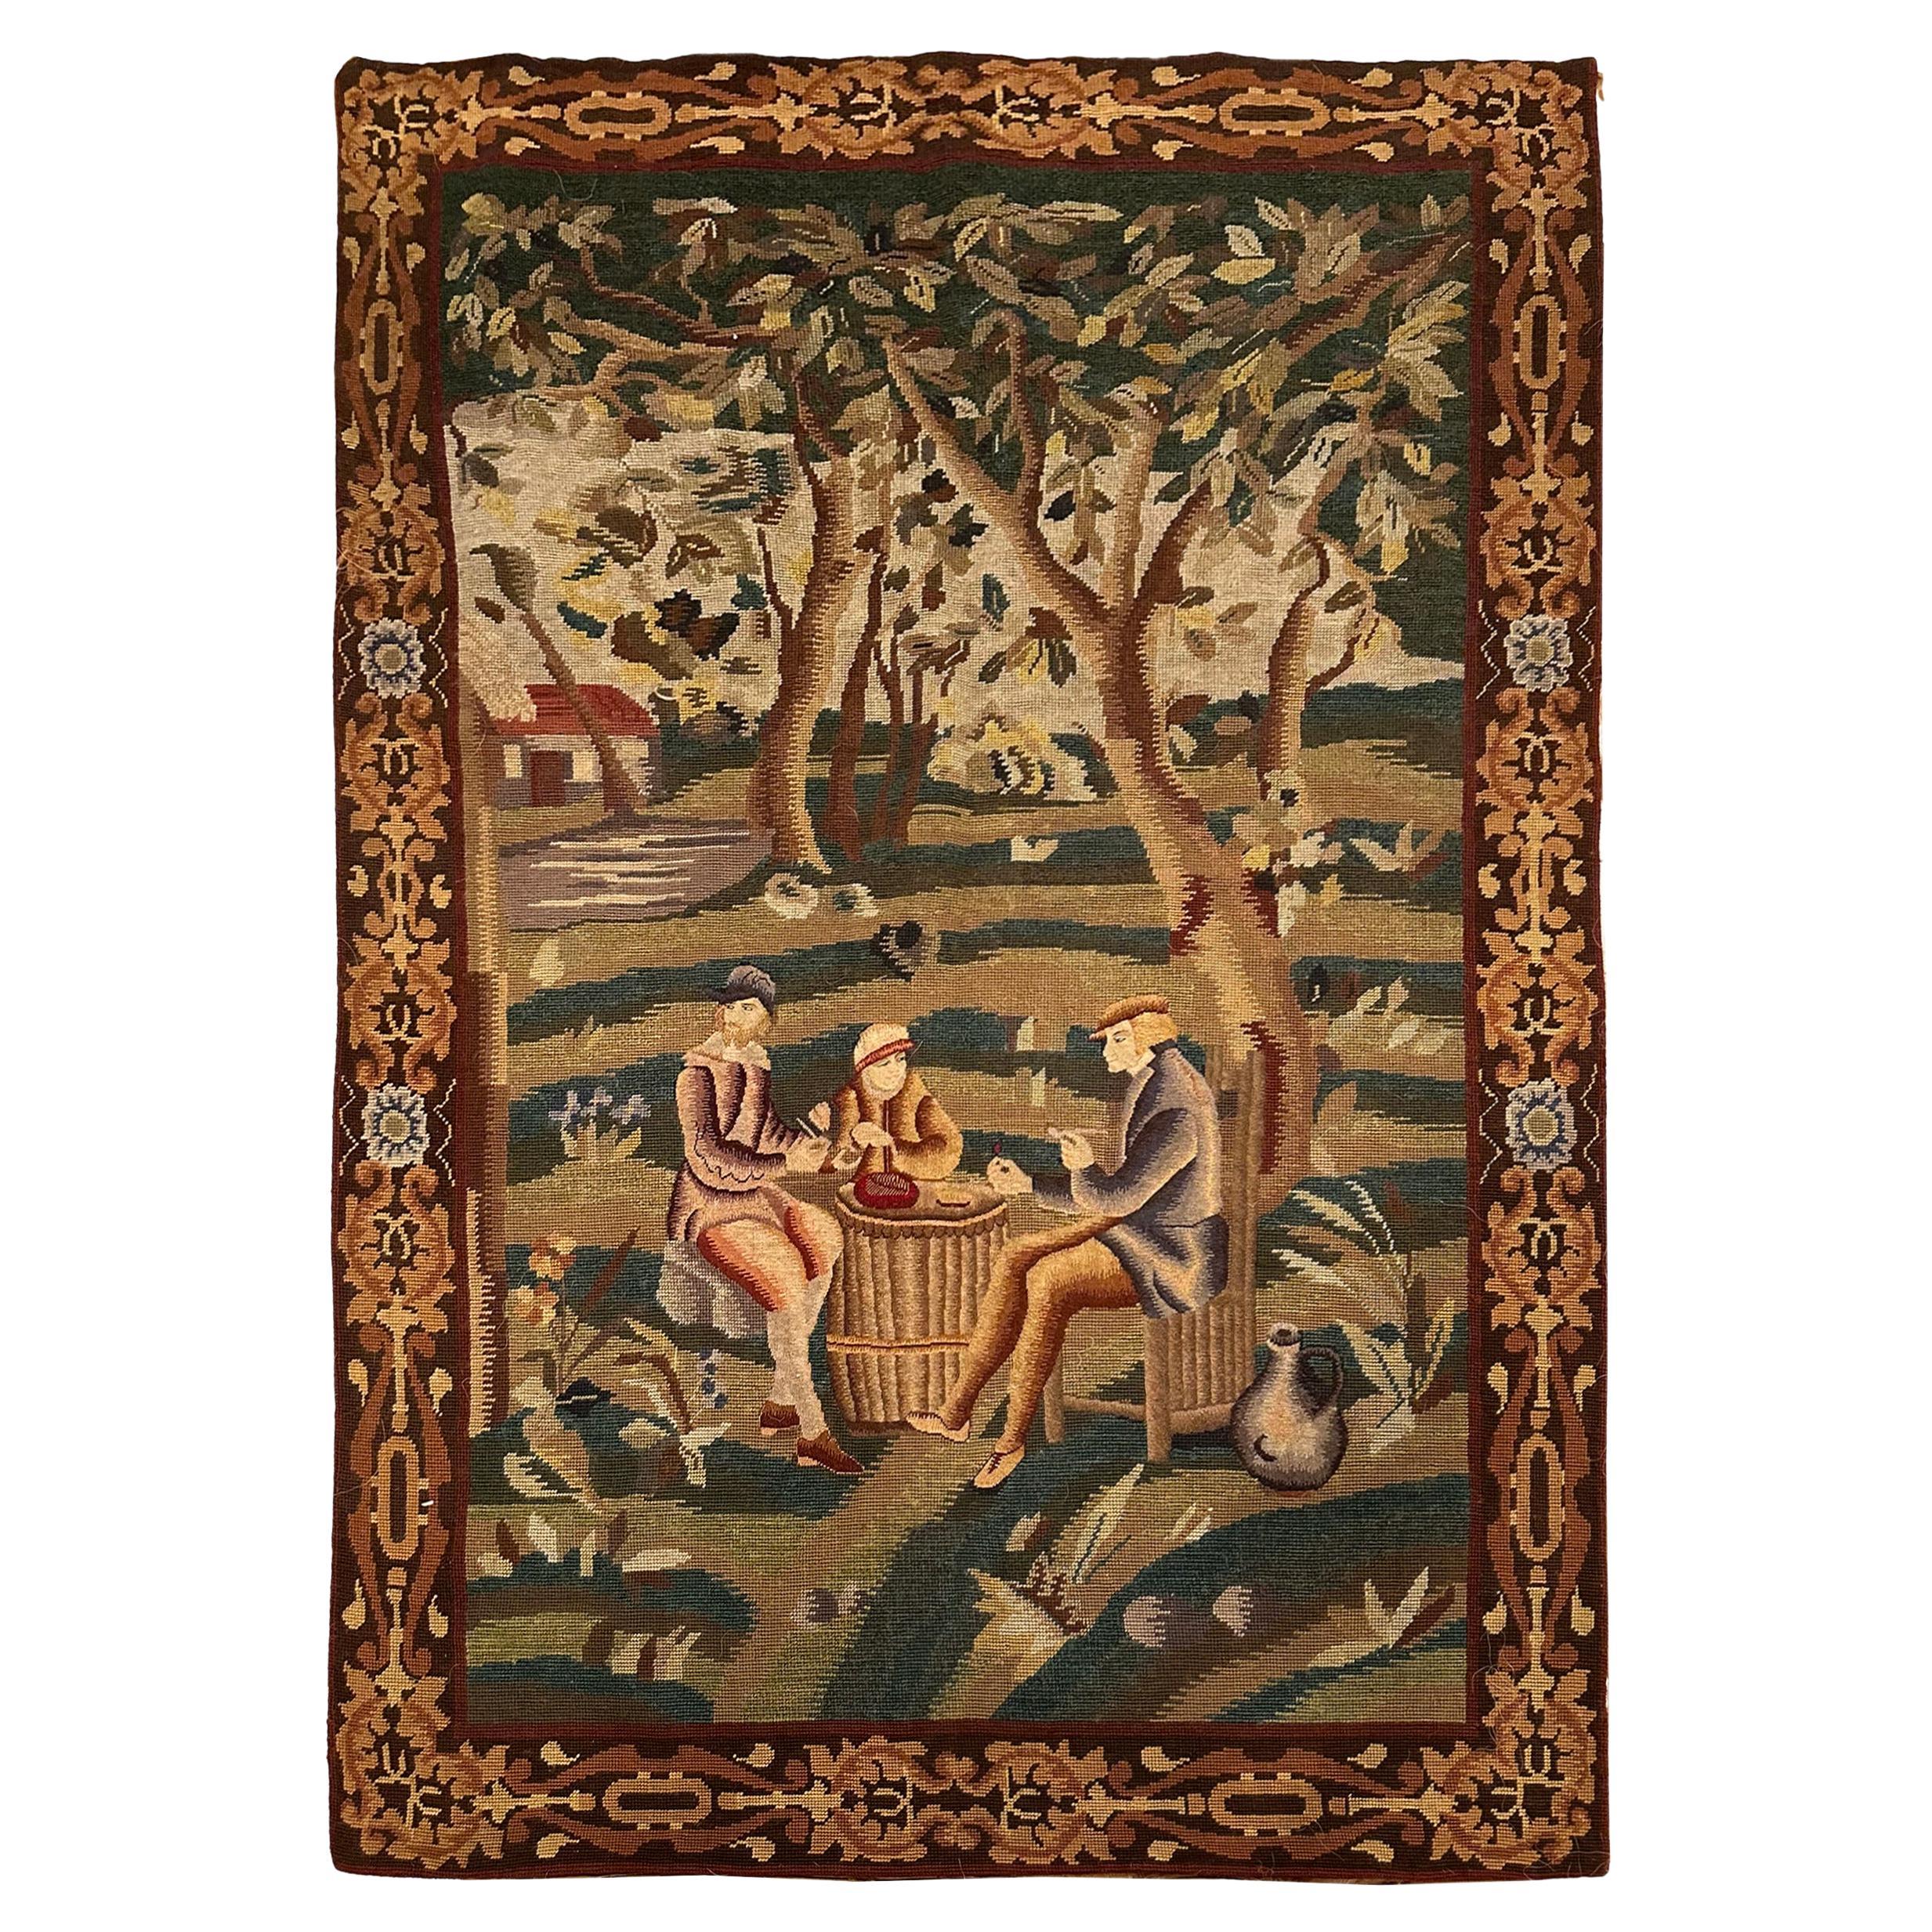 1920 Antique English Needlepoint Tapestry 3x5 3'3" x 4'10" 99cm x 148cm For Sale